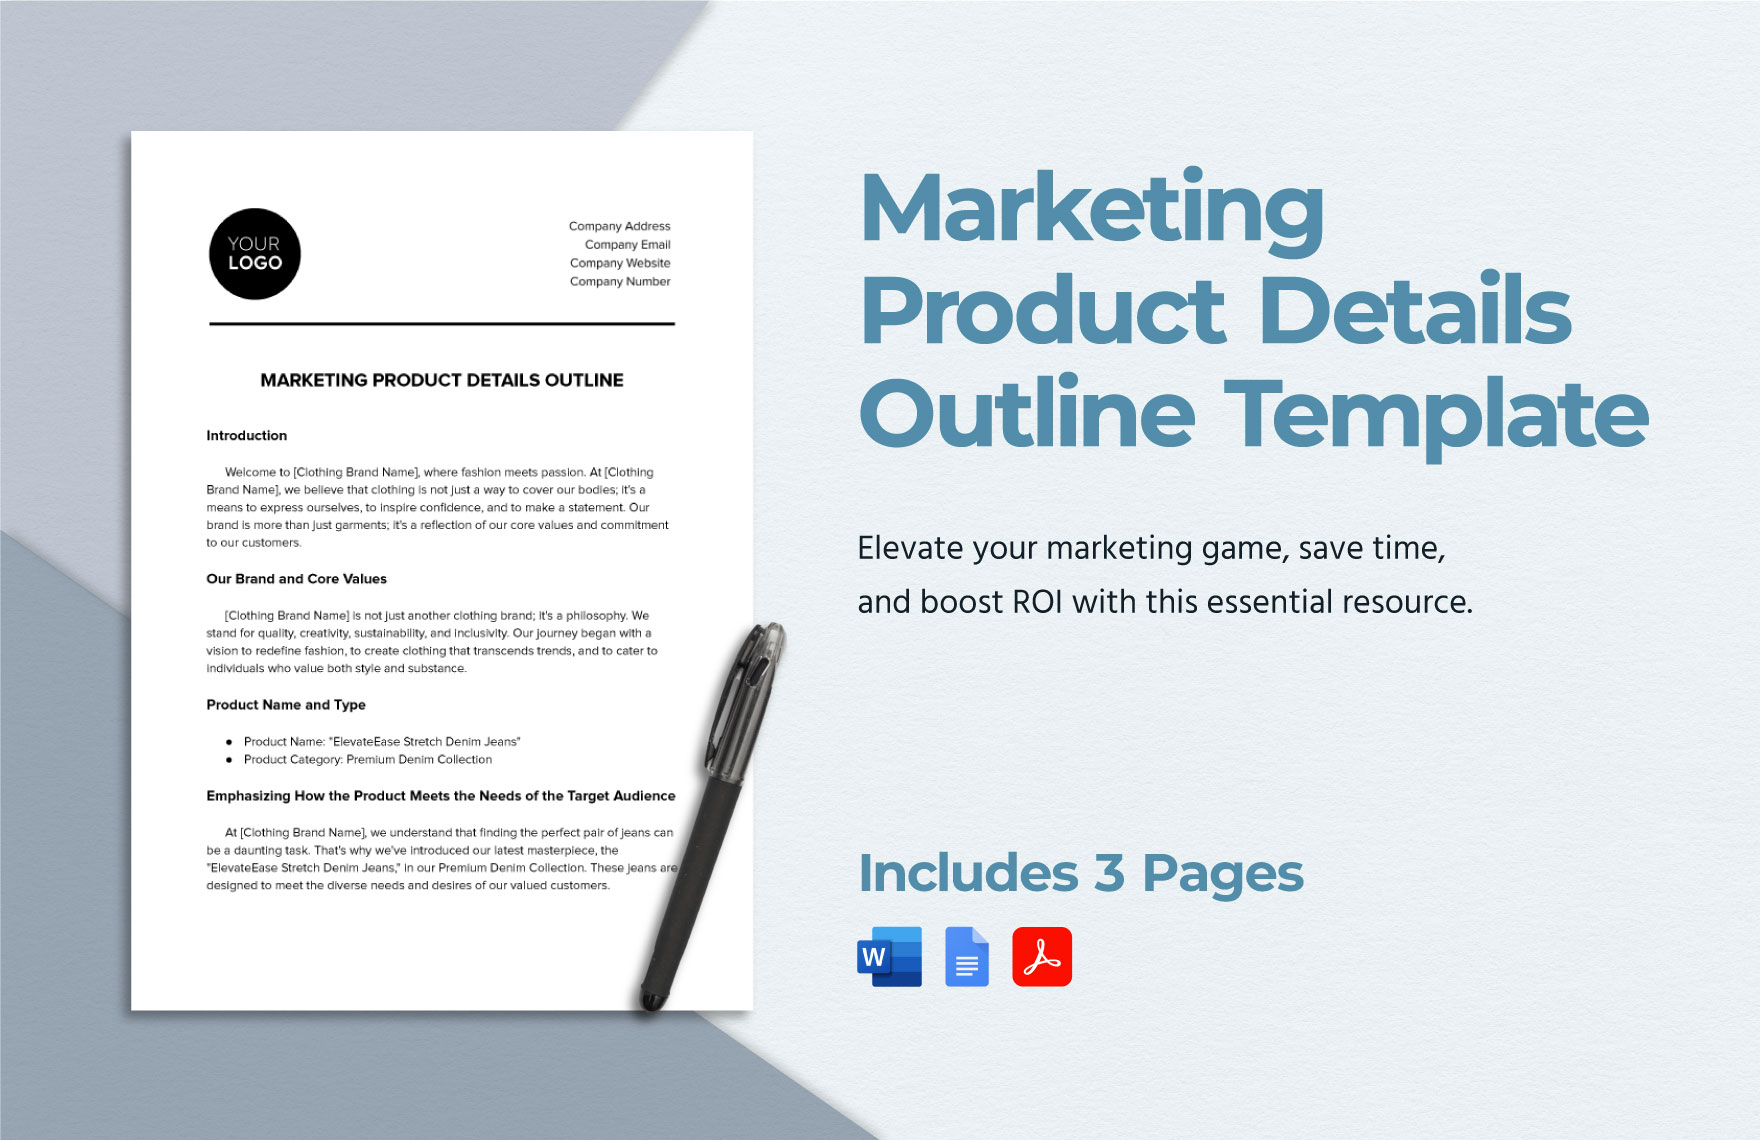 Marketing Product Details Outline Template